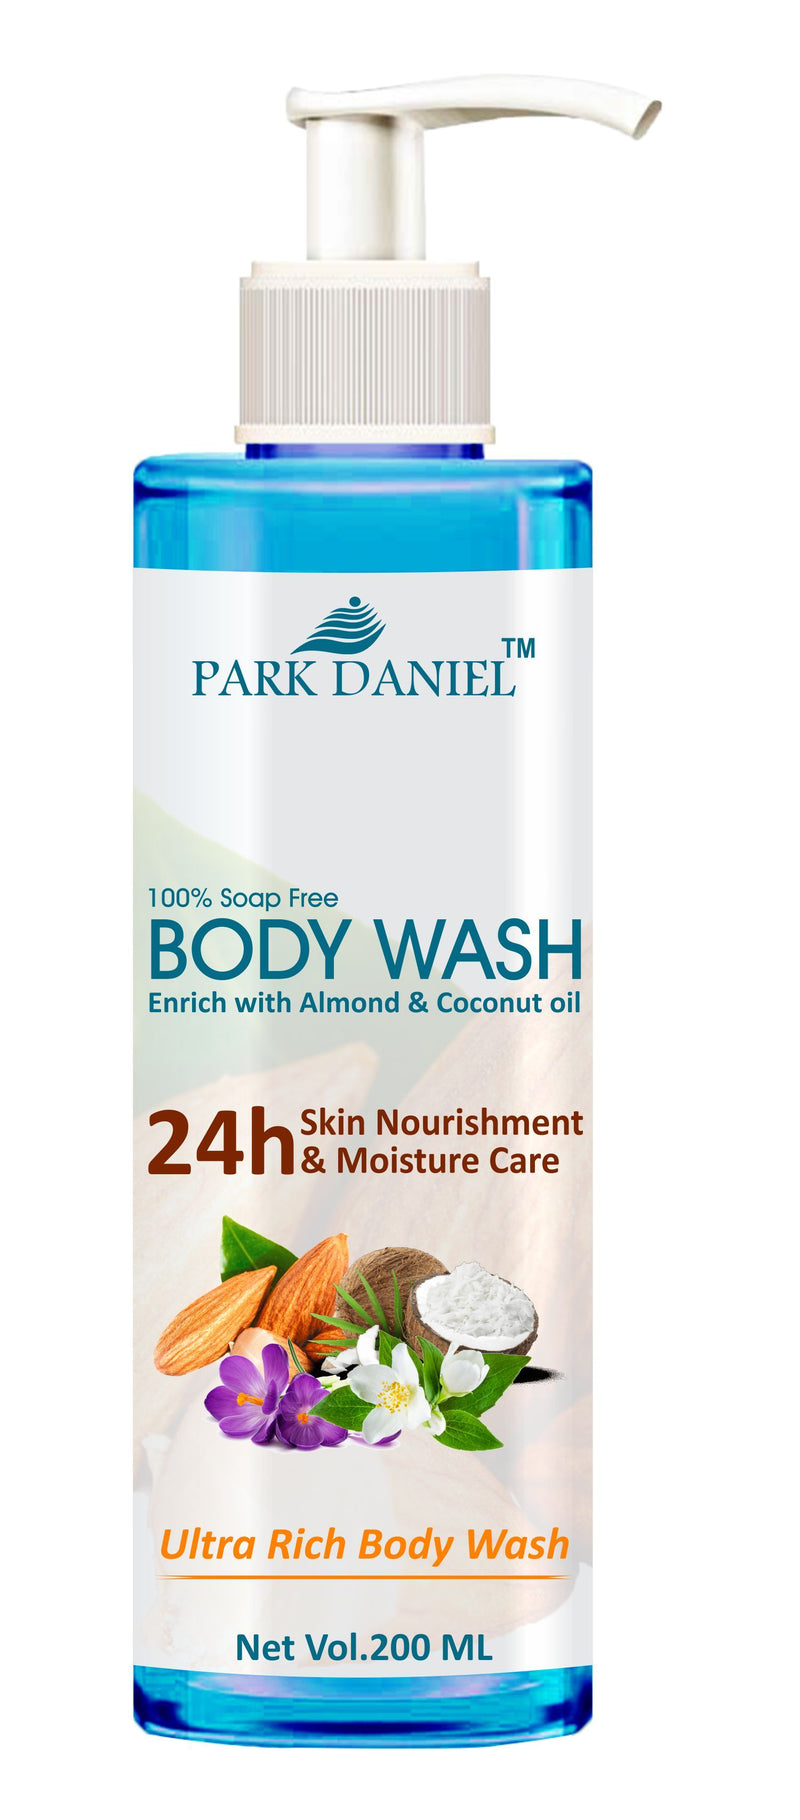 Park Daniel Ultra Rich Body Wash Enriched With Almond and Coconut Oil - For Skin Nourishment and Moisture Care (200 ml)